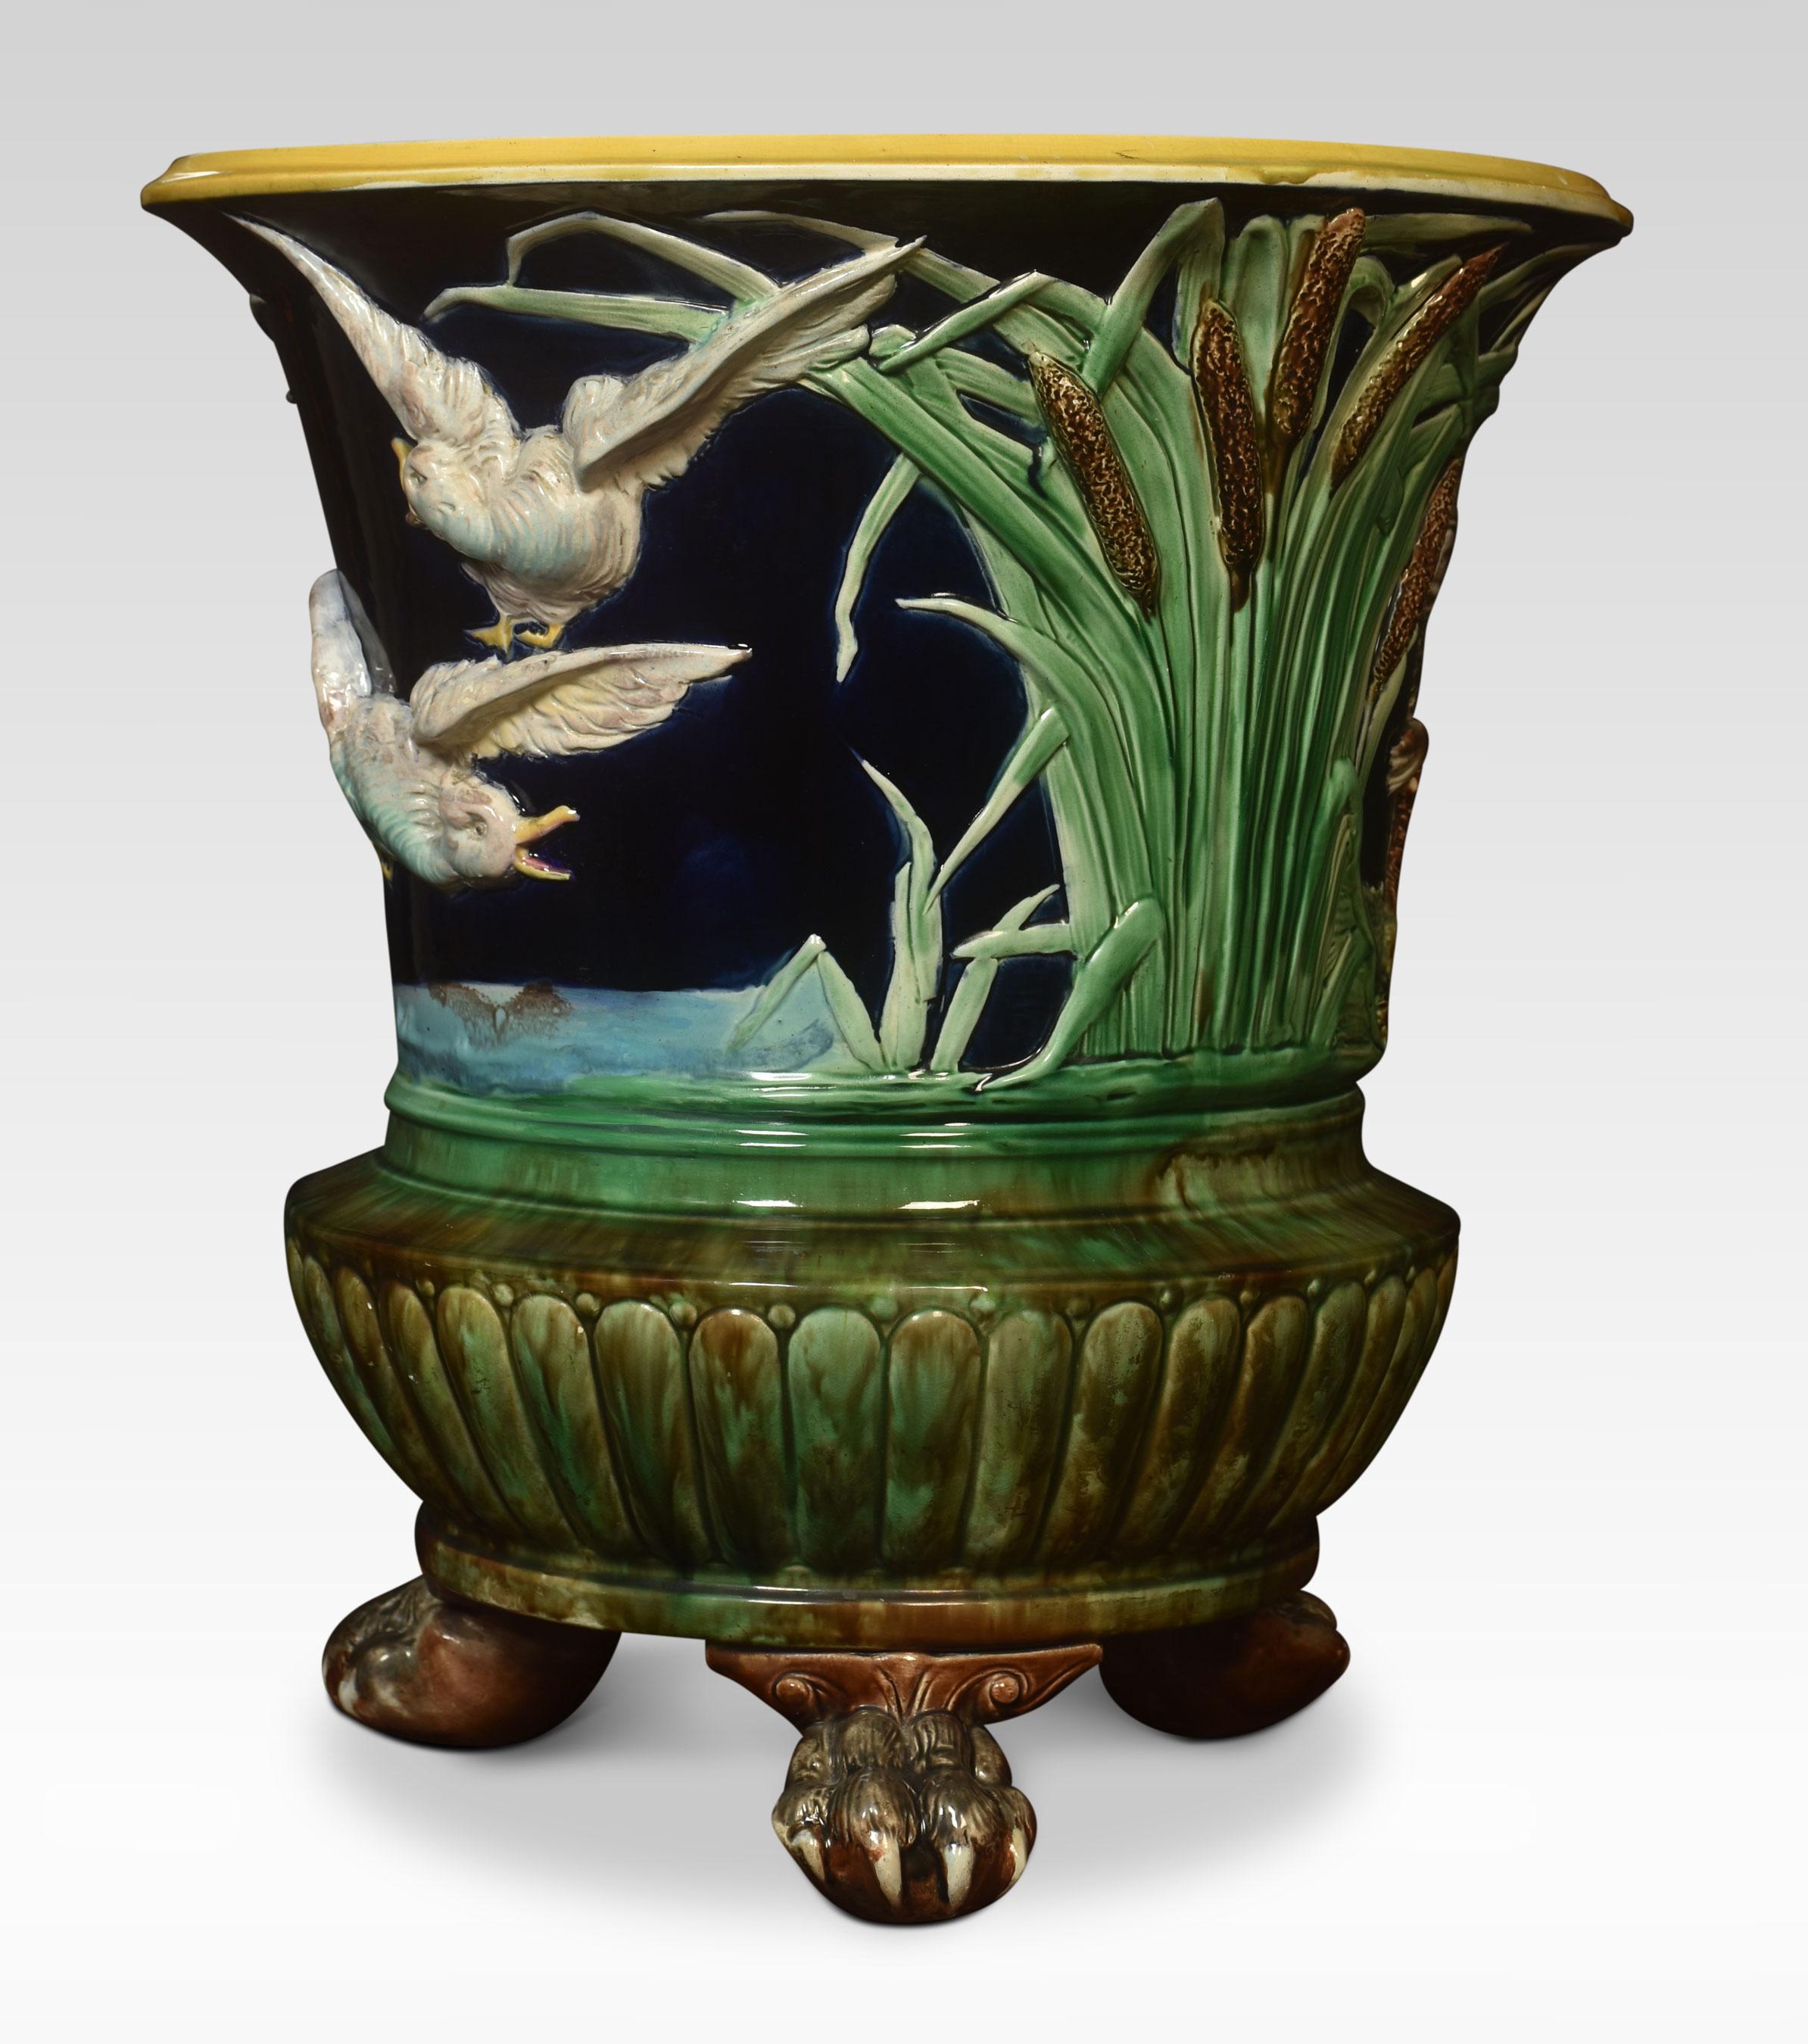 Thomas Forrester Majolica Jardiniere In Good Condition For Sale In Cheshire, GB